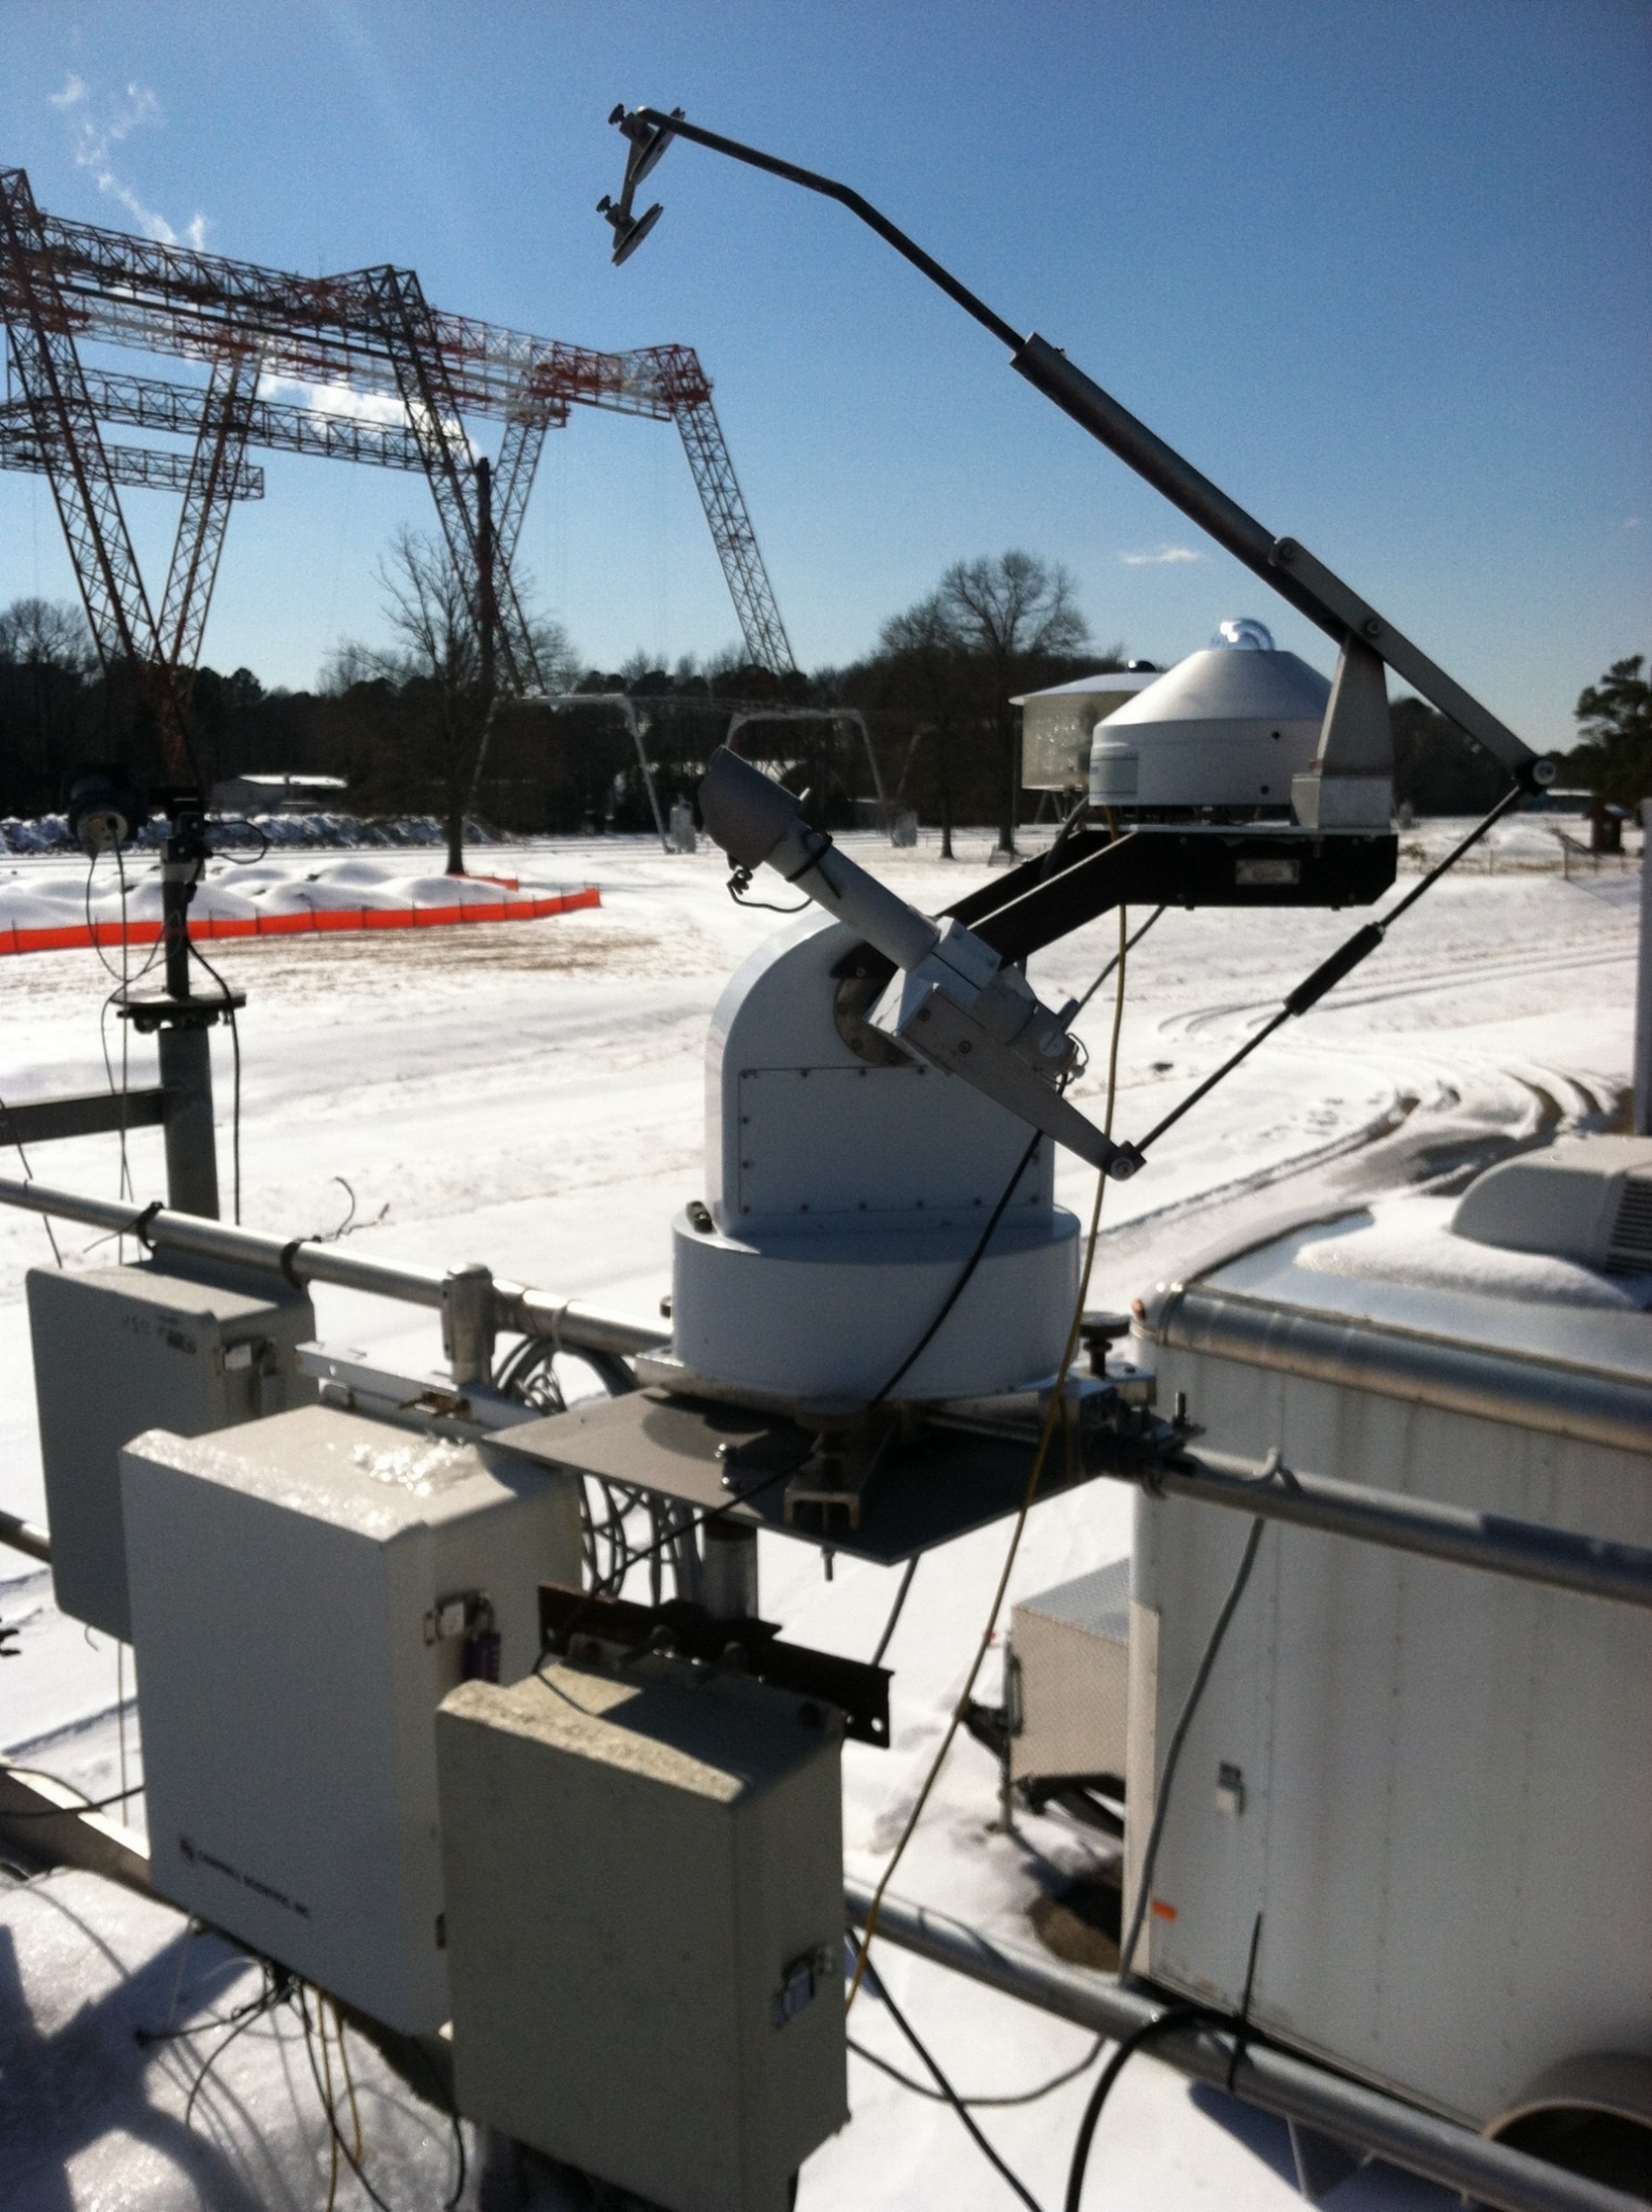 The BSRN-LRC sun tracker at the NASA Langley Research Center on a snowy day (02/20/2015)